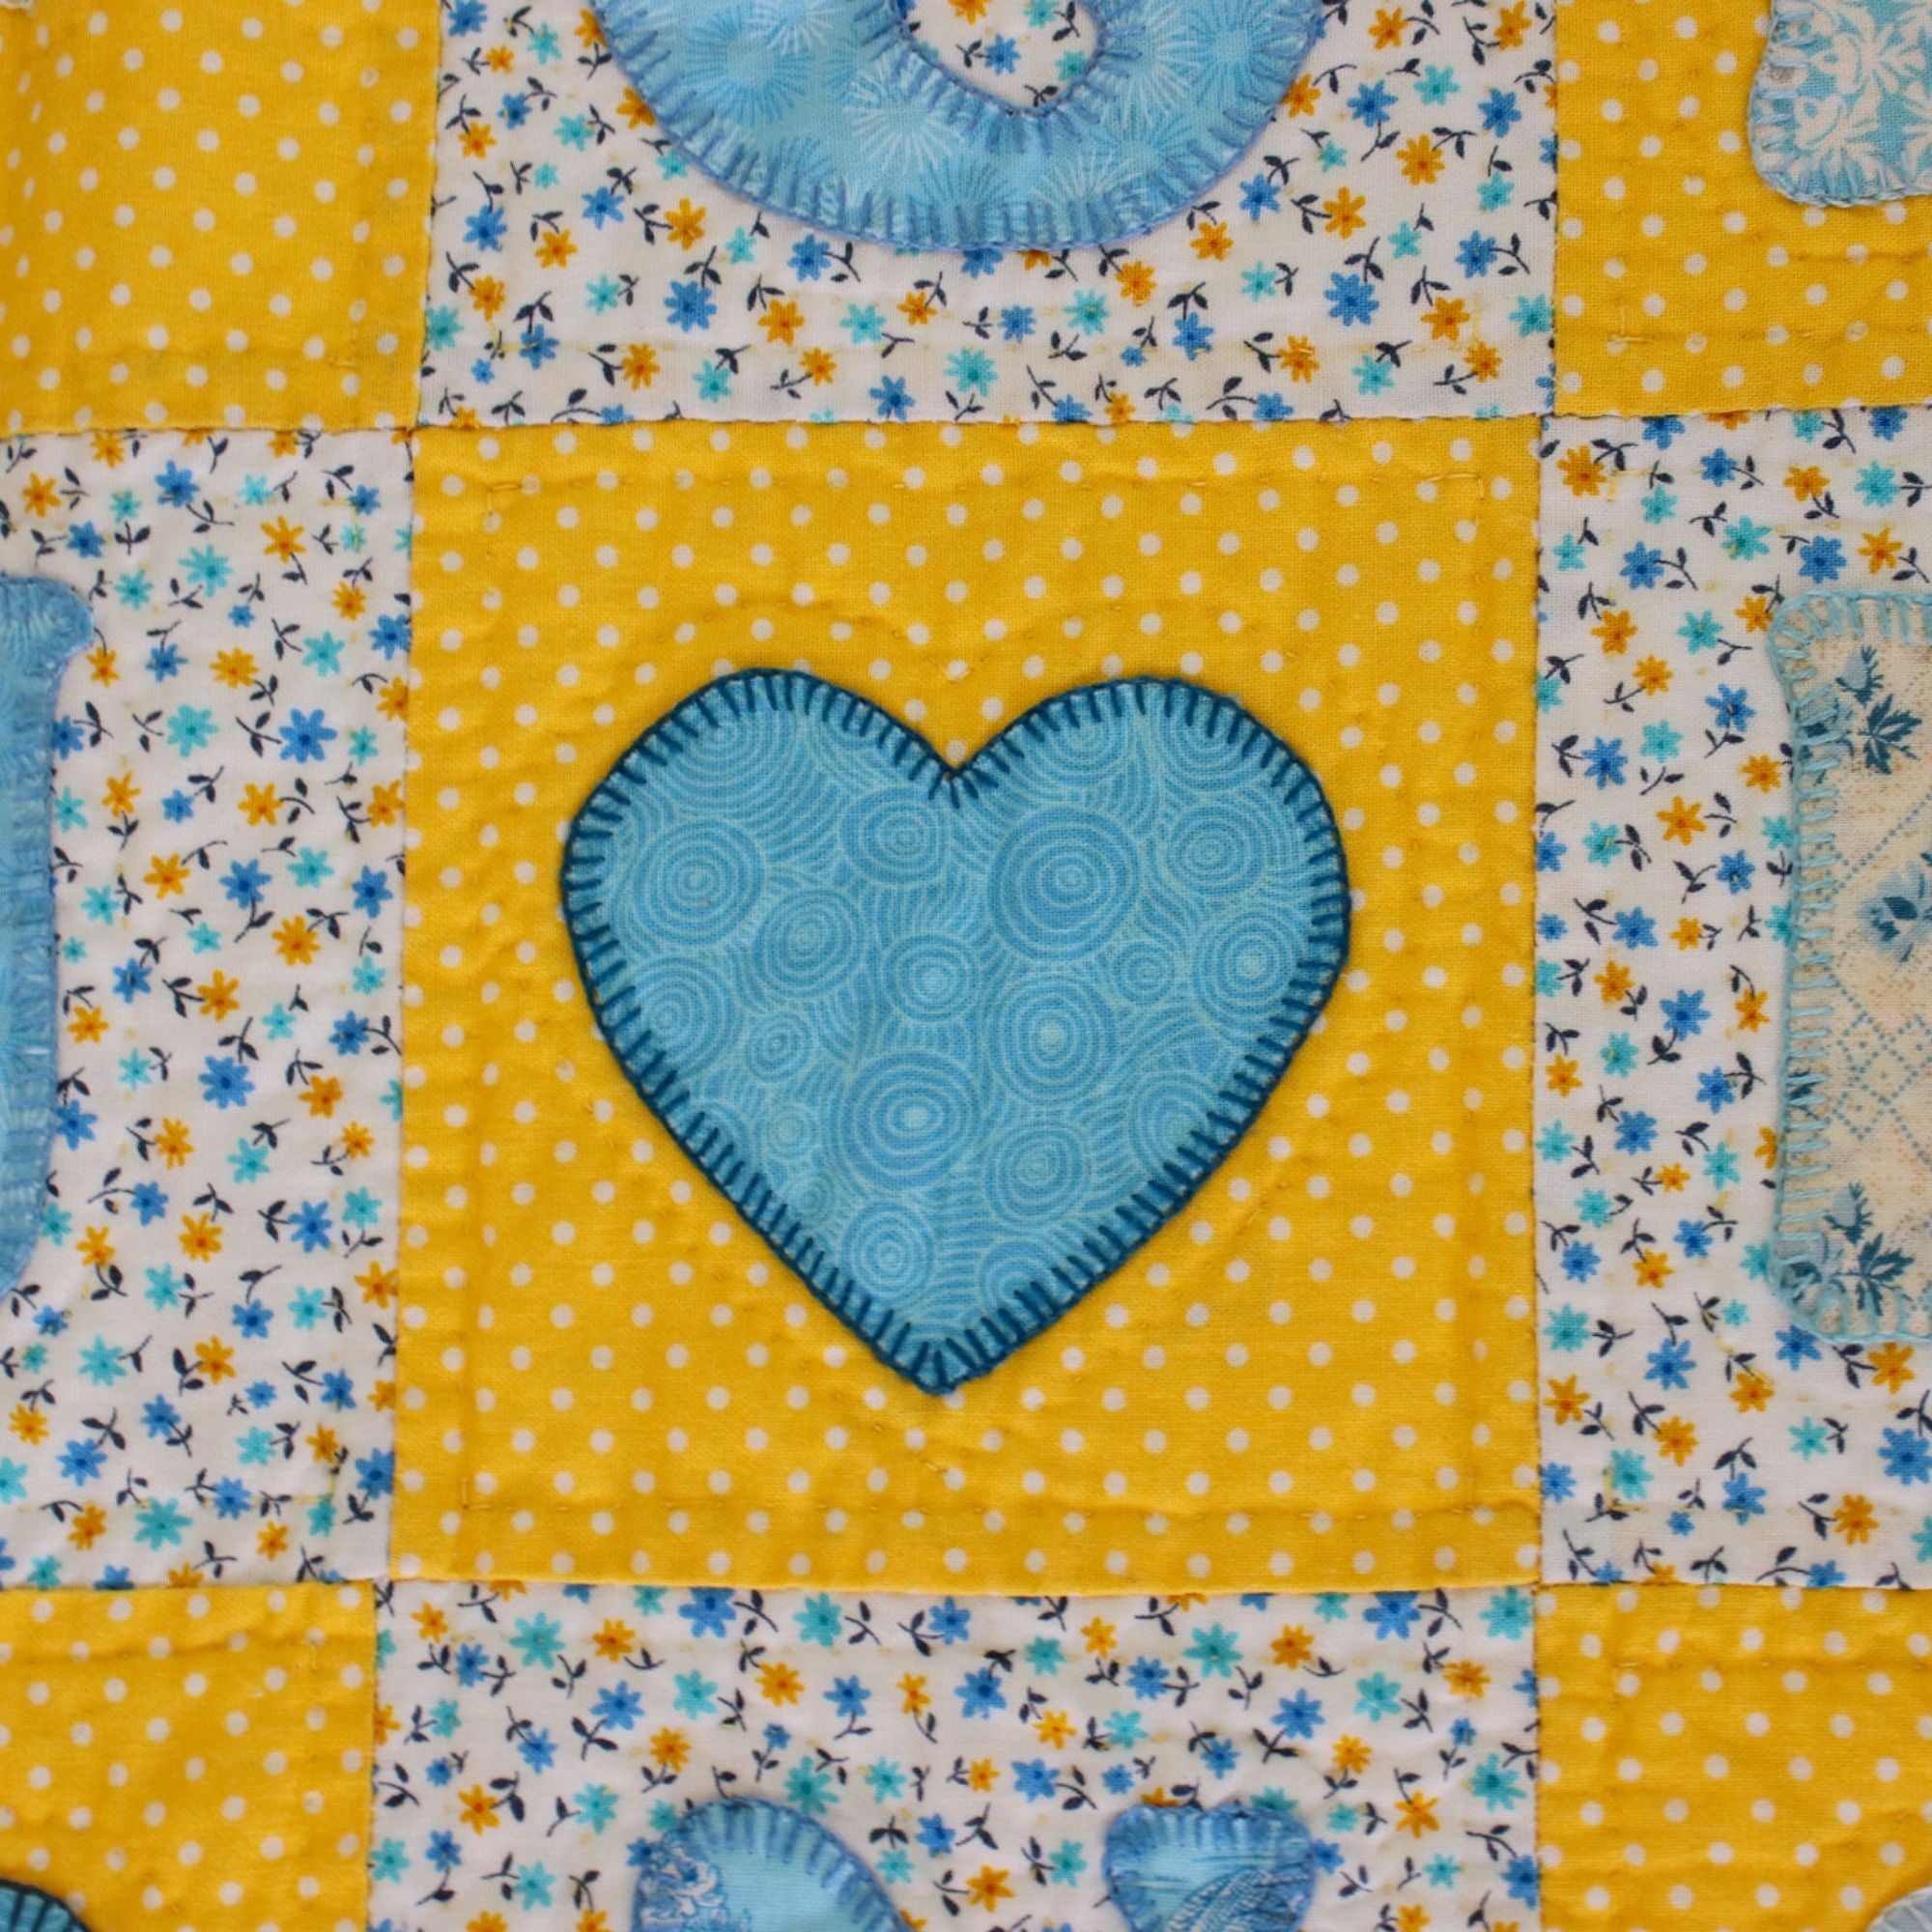 Children's Handmade 'Blue and Yellow Hearts' Quilt